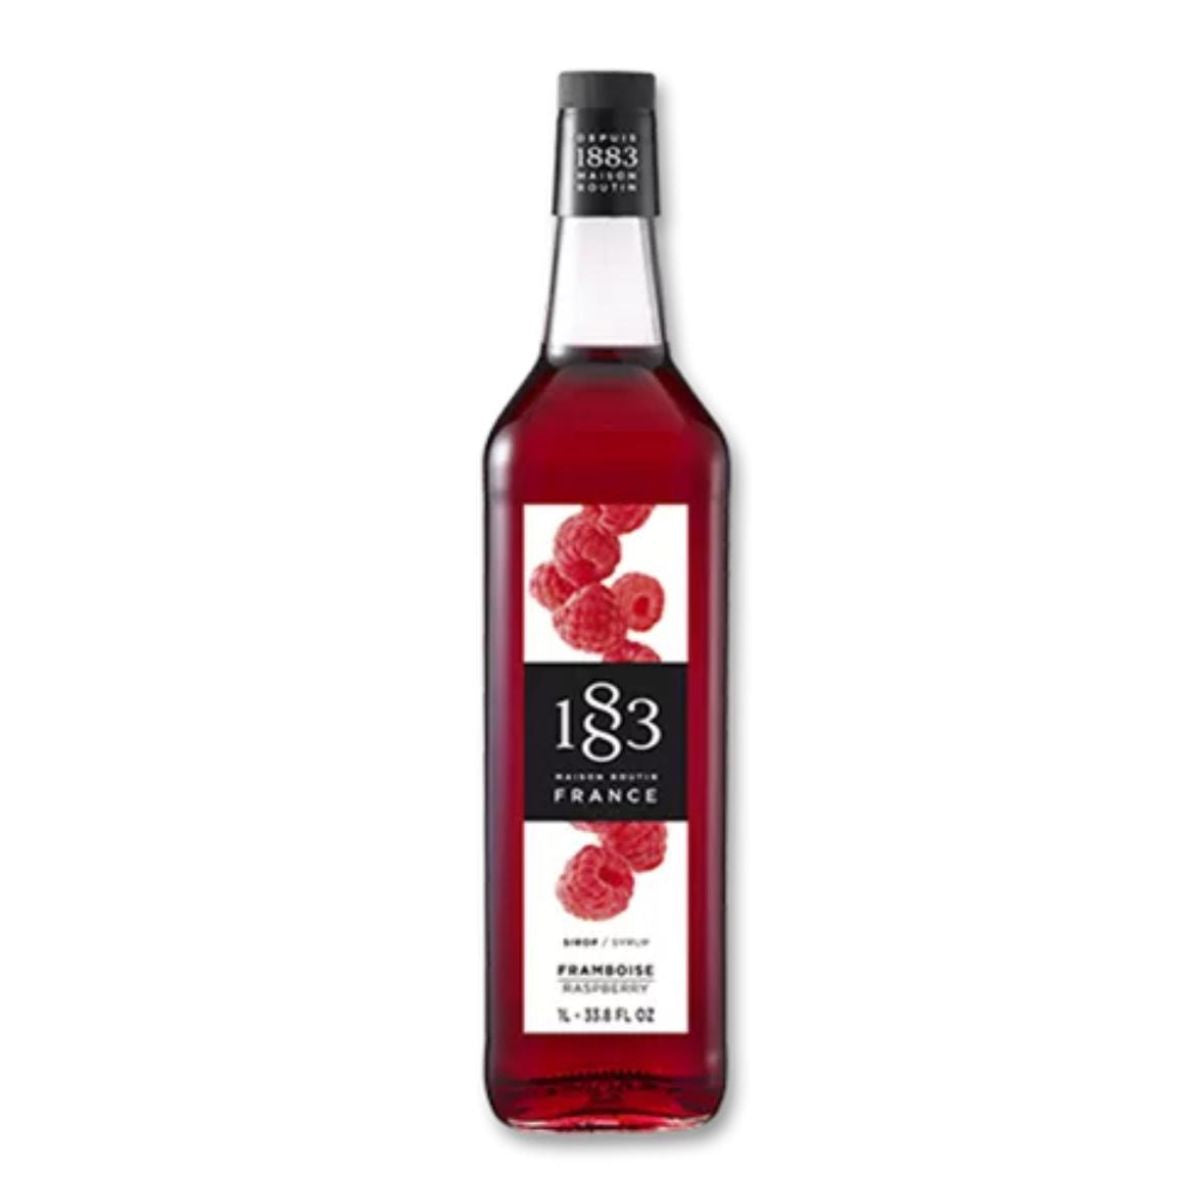 1883 Classic Flavored Syrups - 1L Plastic Bottle: Sugar Free Raspberry